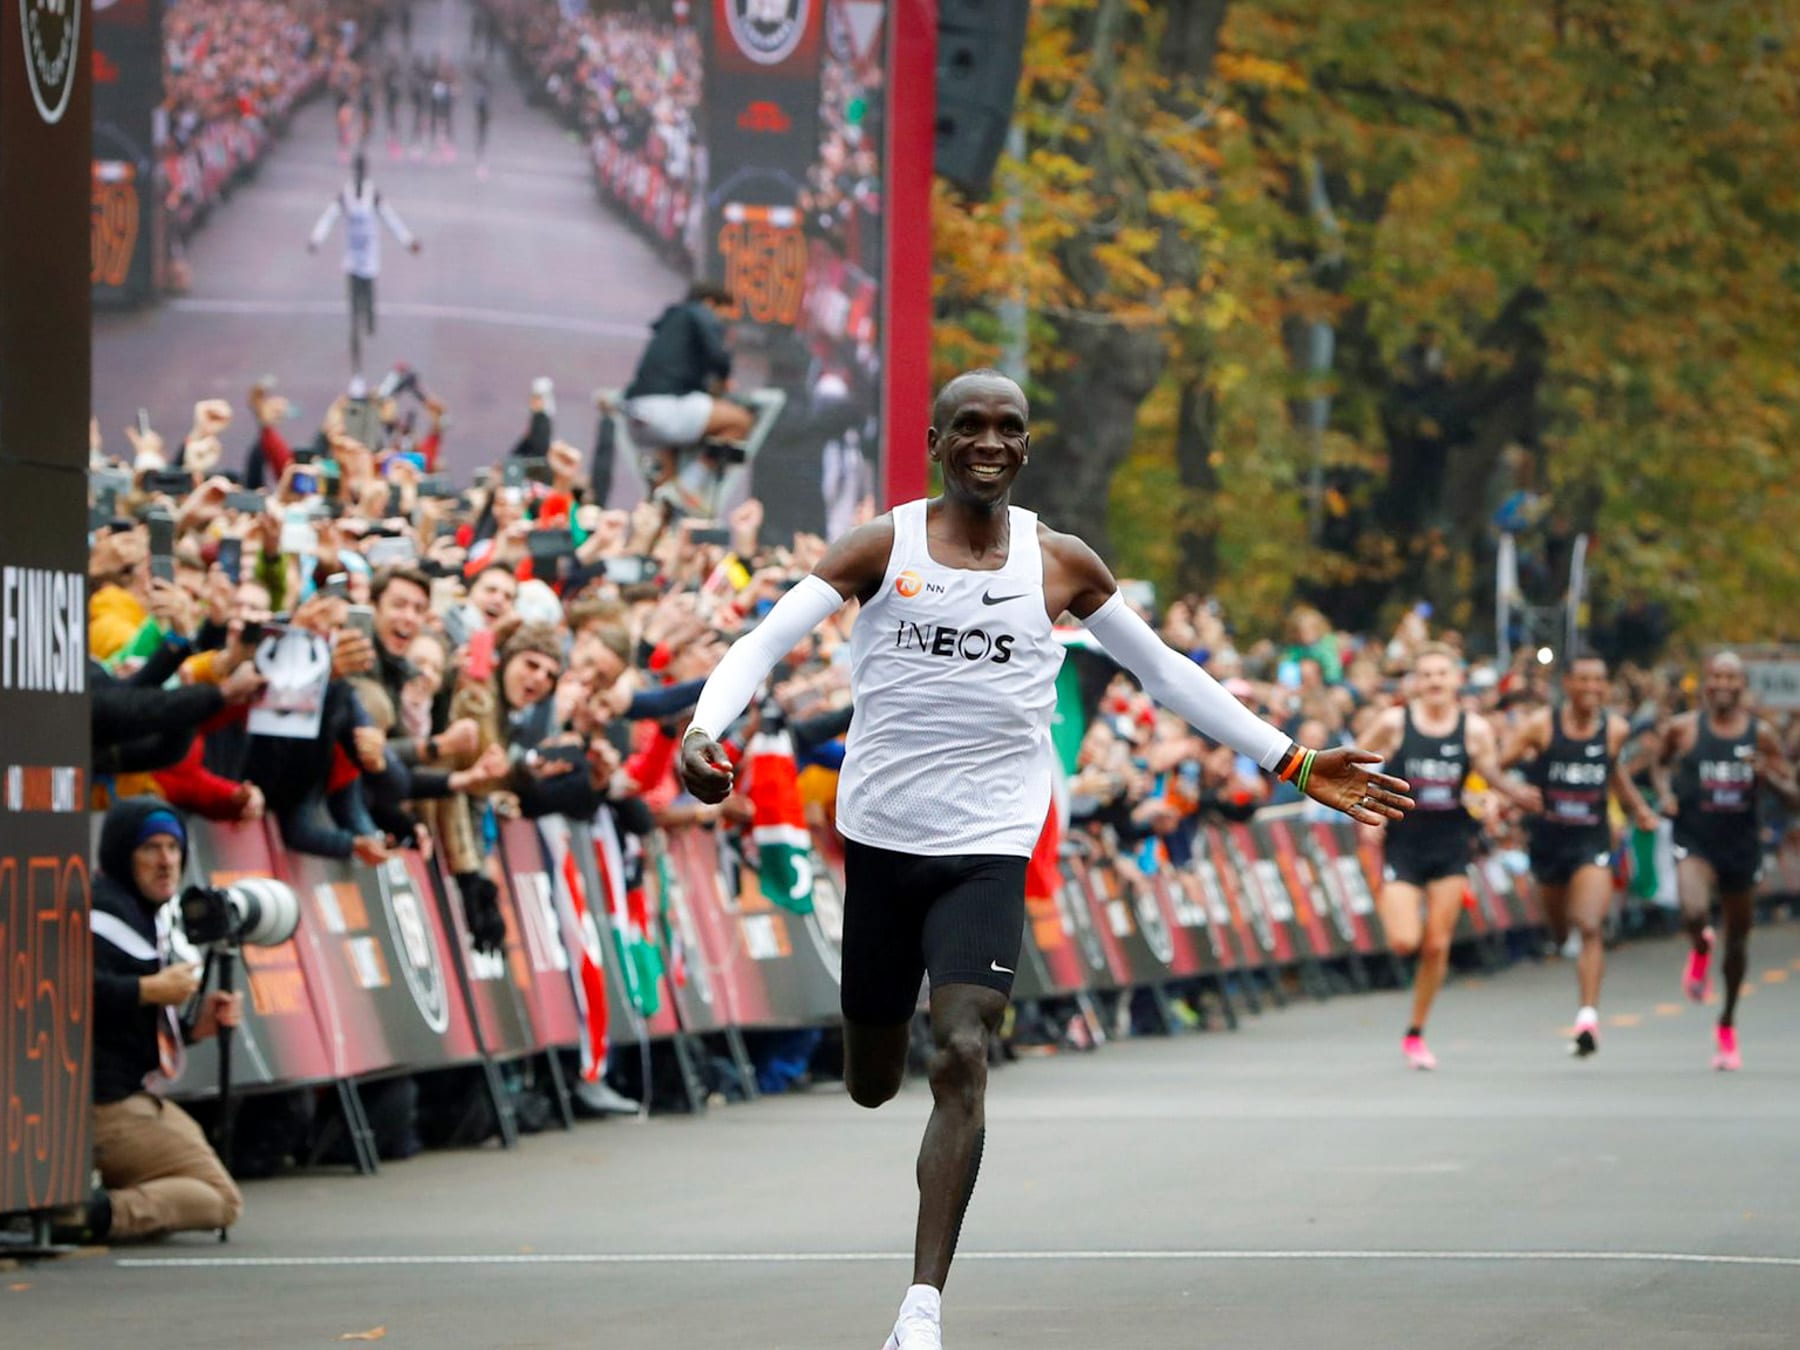 Eliud Kipchoge became the first and only man to run a marathon in less than 2 hours.